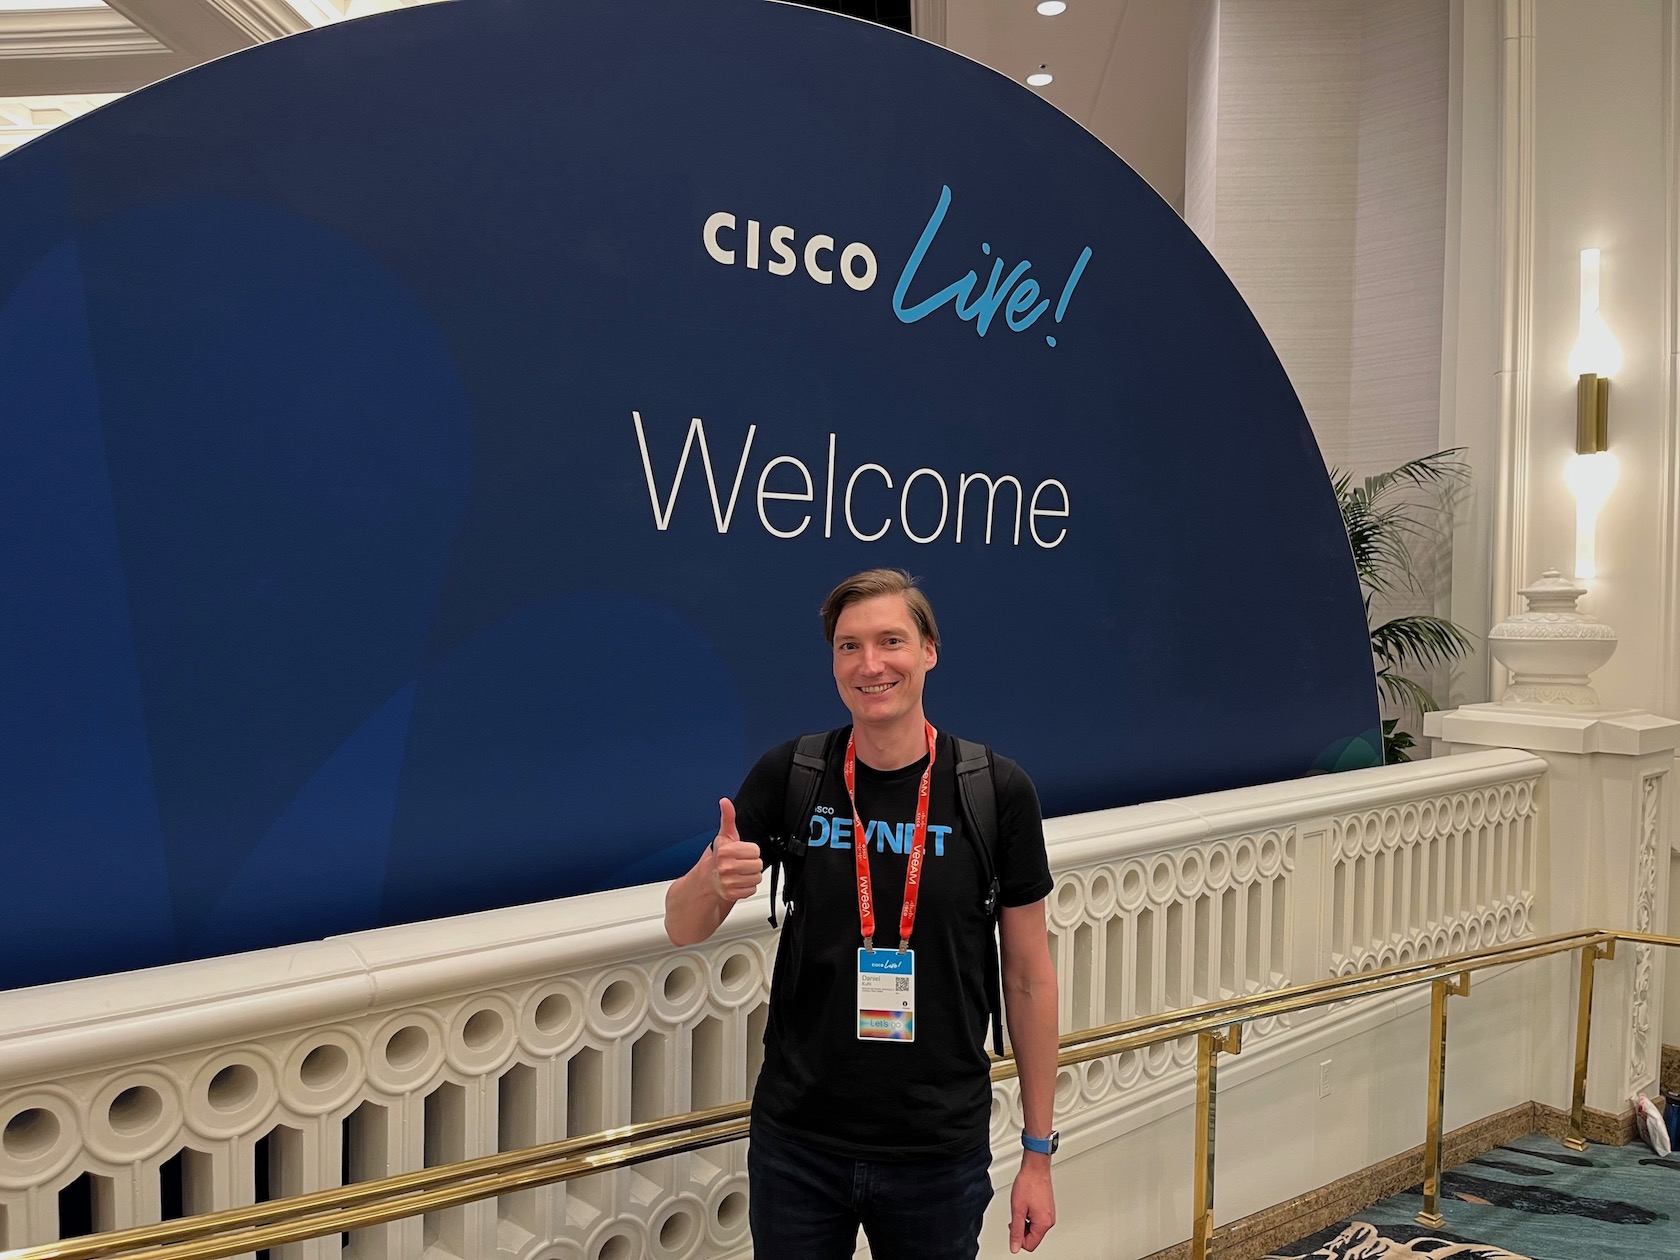 Welcome to Cisco Live